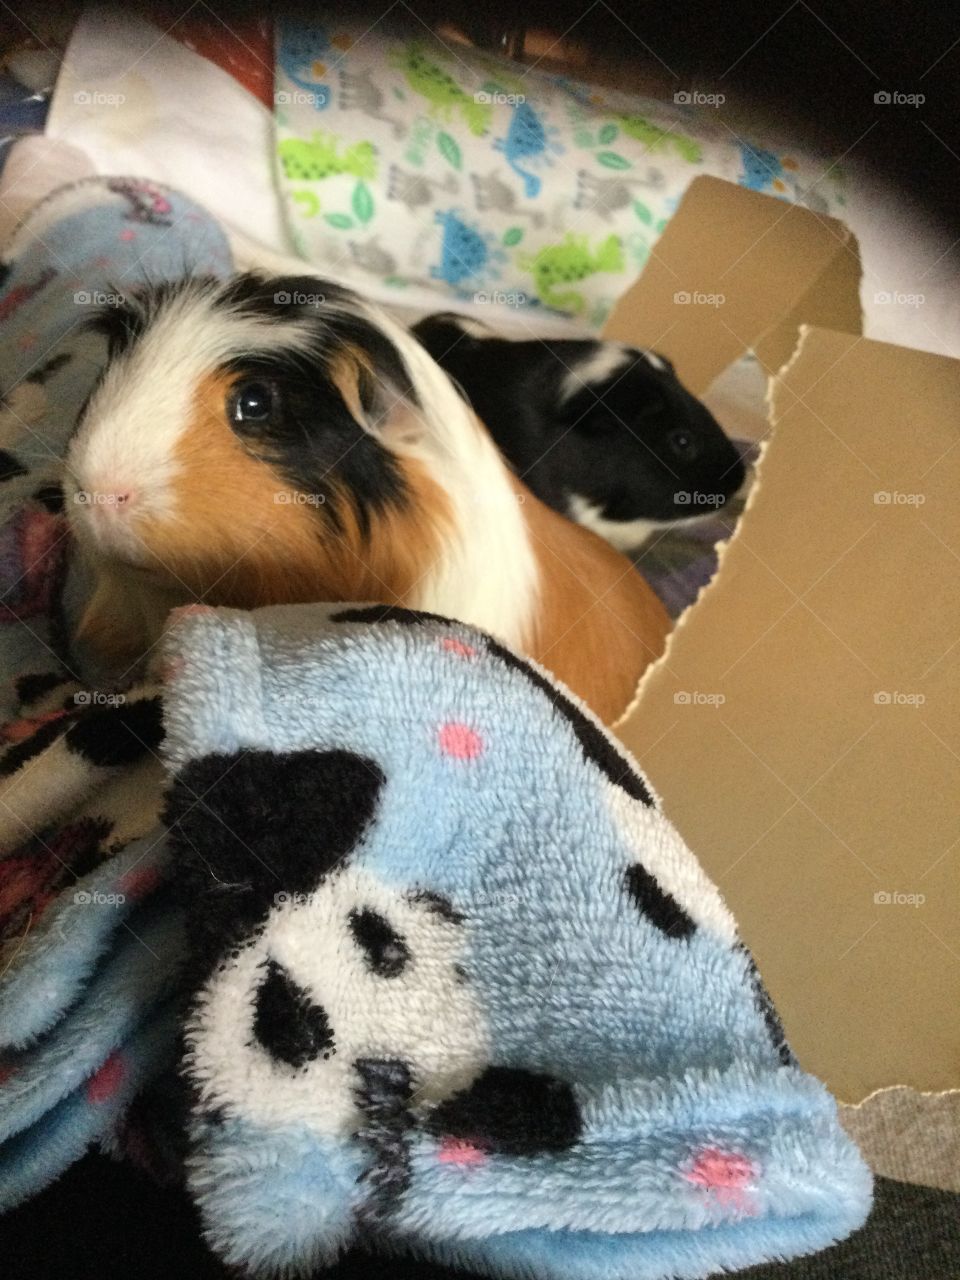 Guinea pigs playtime on the bed 